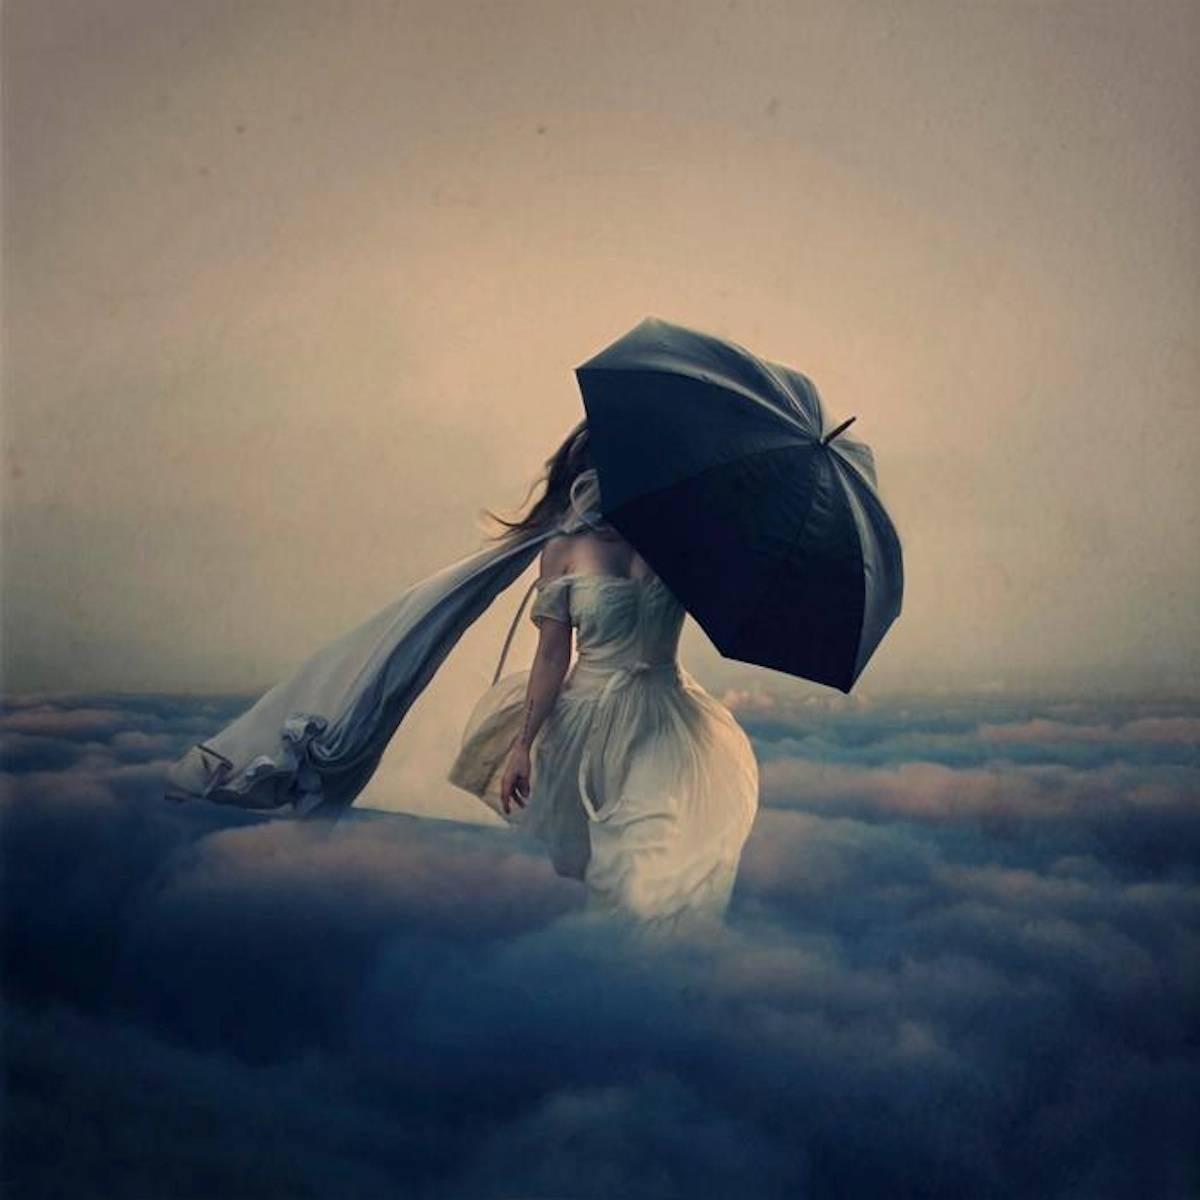 Brooke Shaden Figurative Photograph - The Storm Above the Clouds